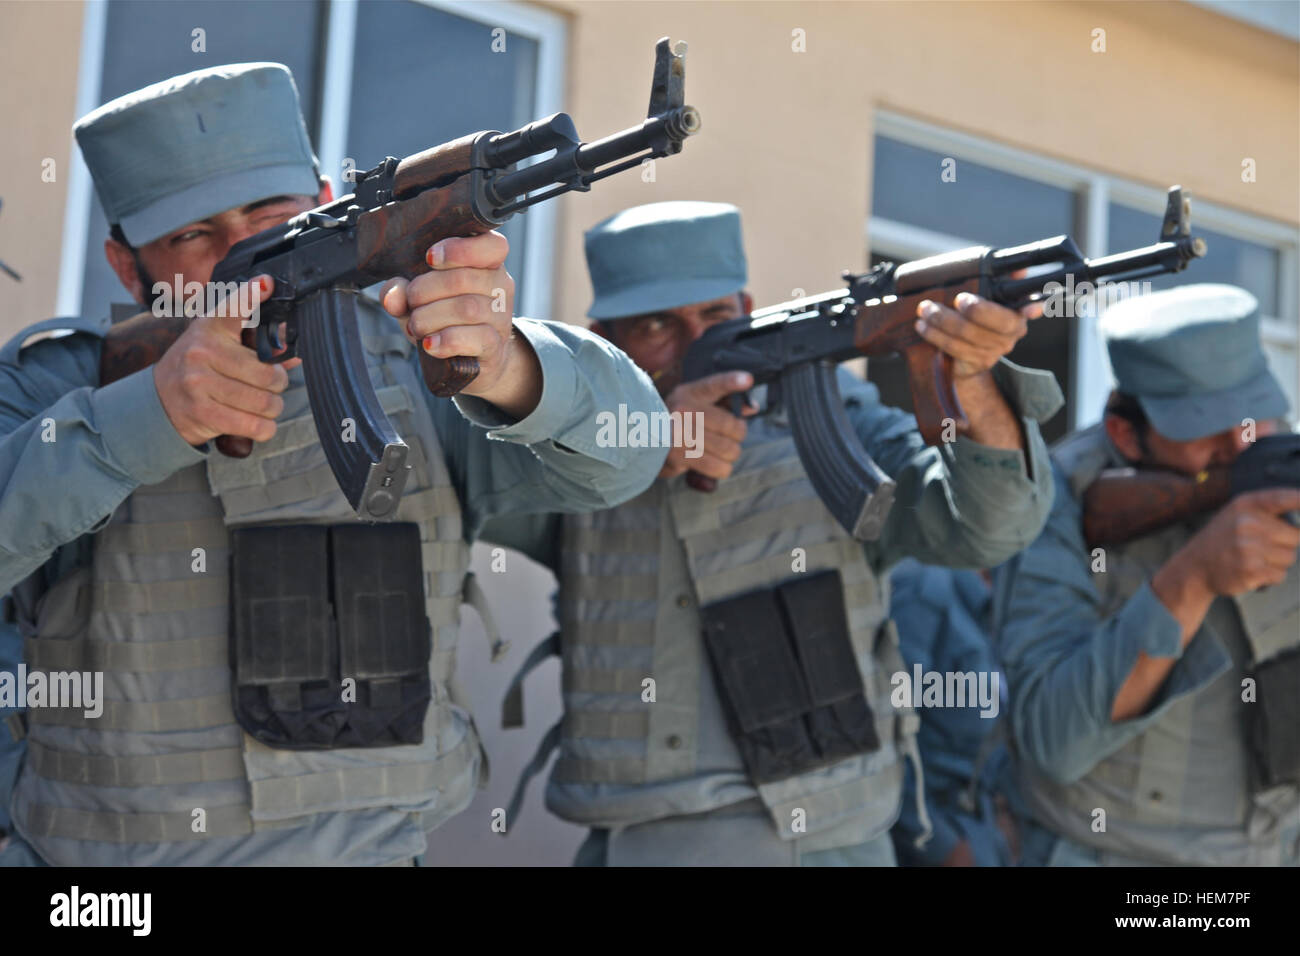 A group of Afghan Uniform Police recruits aim their assigned AK-47 assault  rifles down range as they practice the fundamentals of shooting during  firearms training at Forward Operating Base Shank, Logar province,